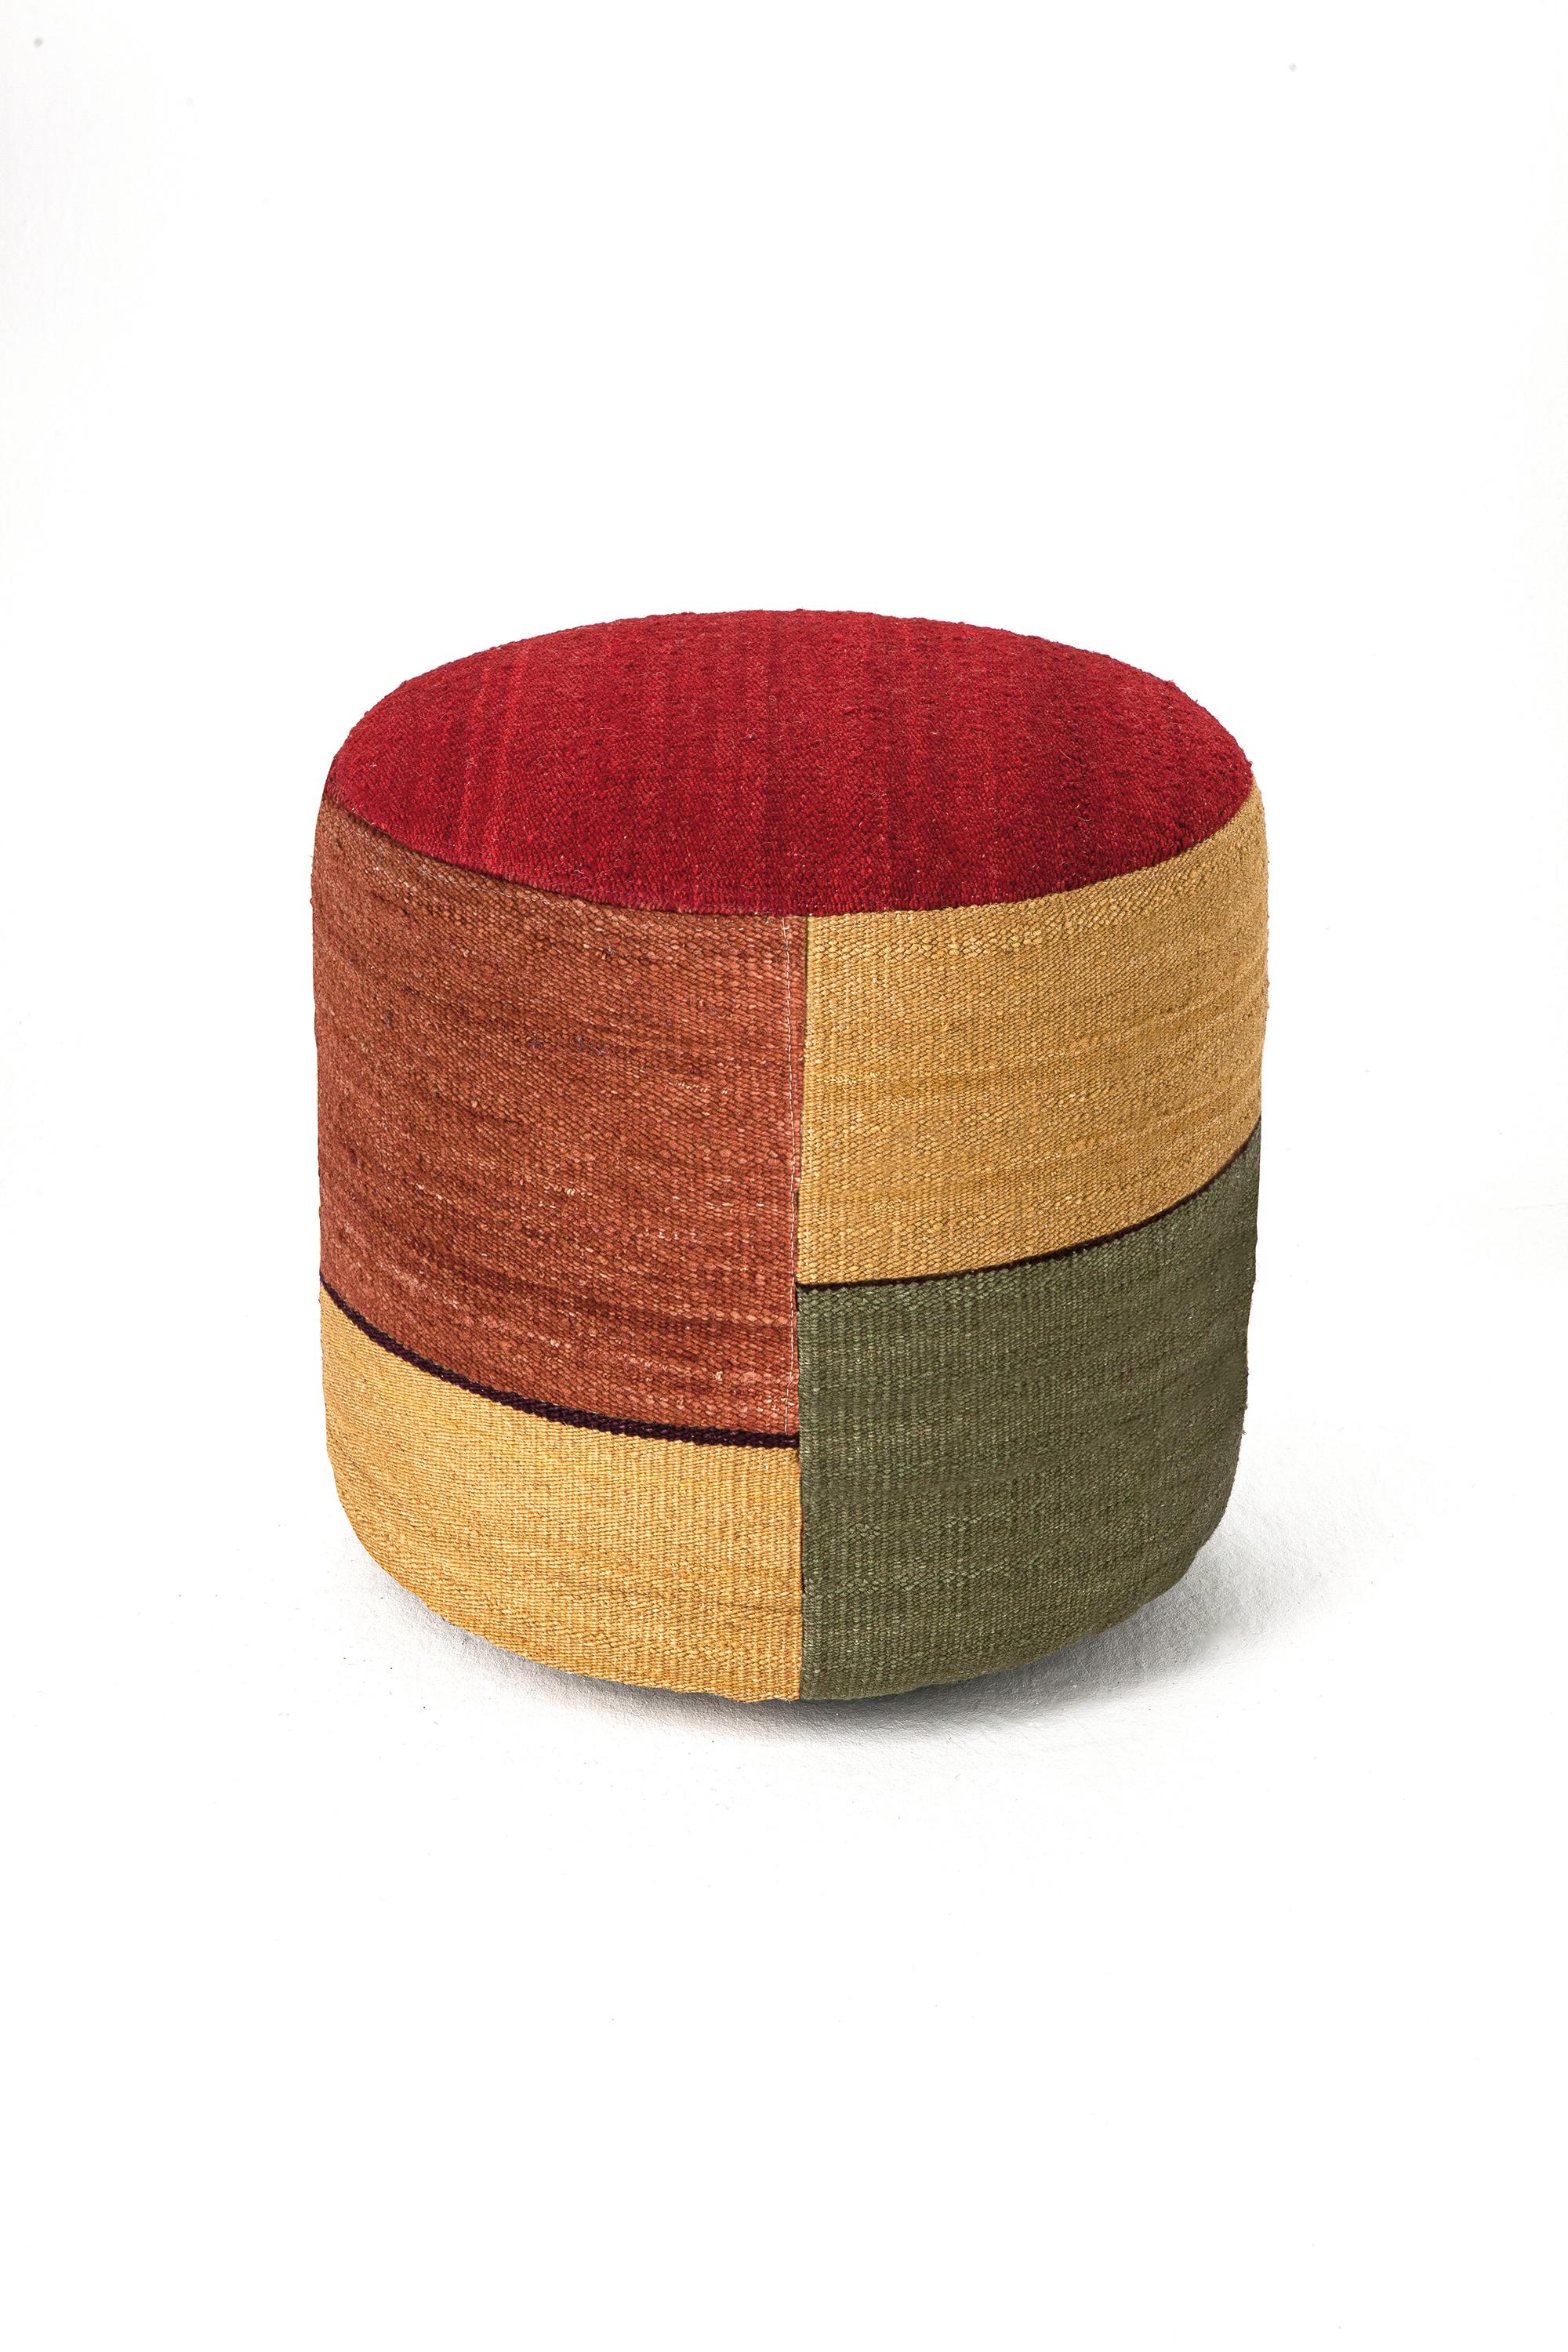 'Kilim 4' Pouf by Nani Marquina and Marcos Catalán for Nanimarquina For Sale 9